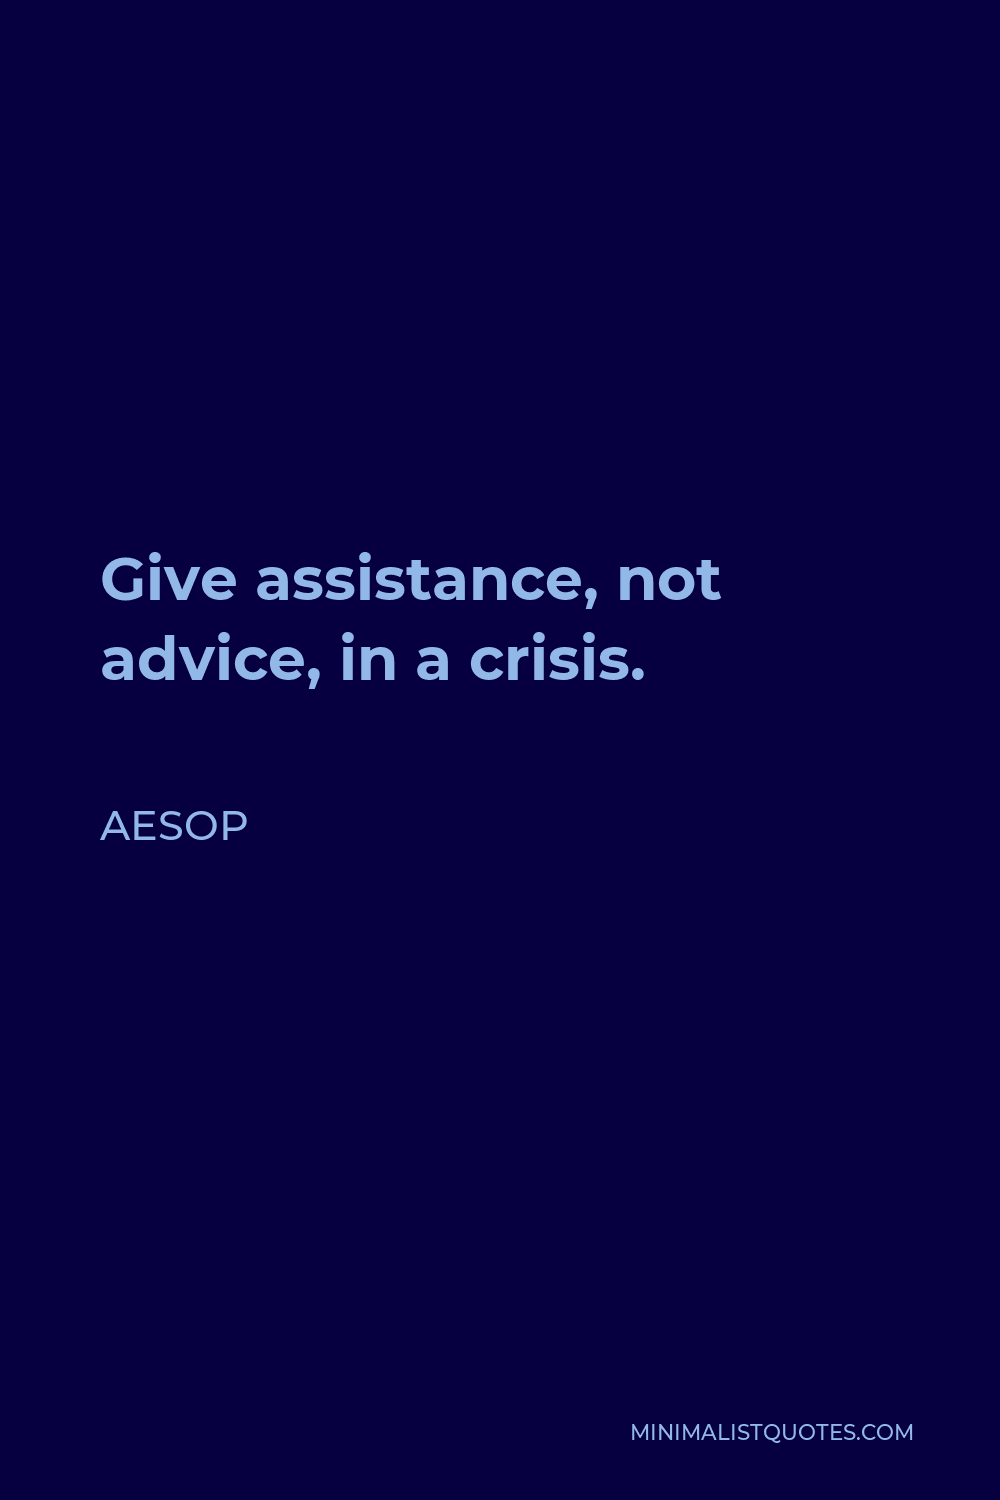 Aesop Quote - Give assistance, not advice, in a crisis.